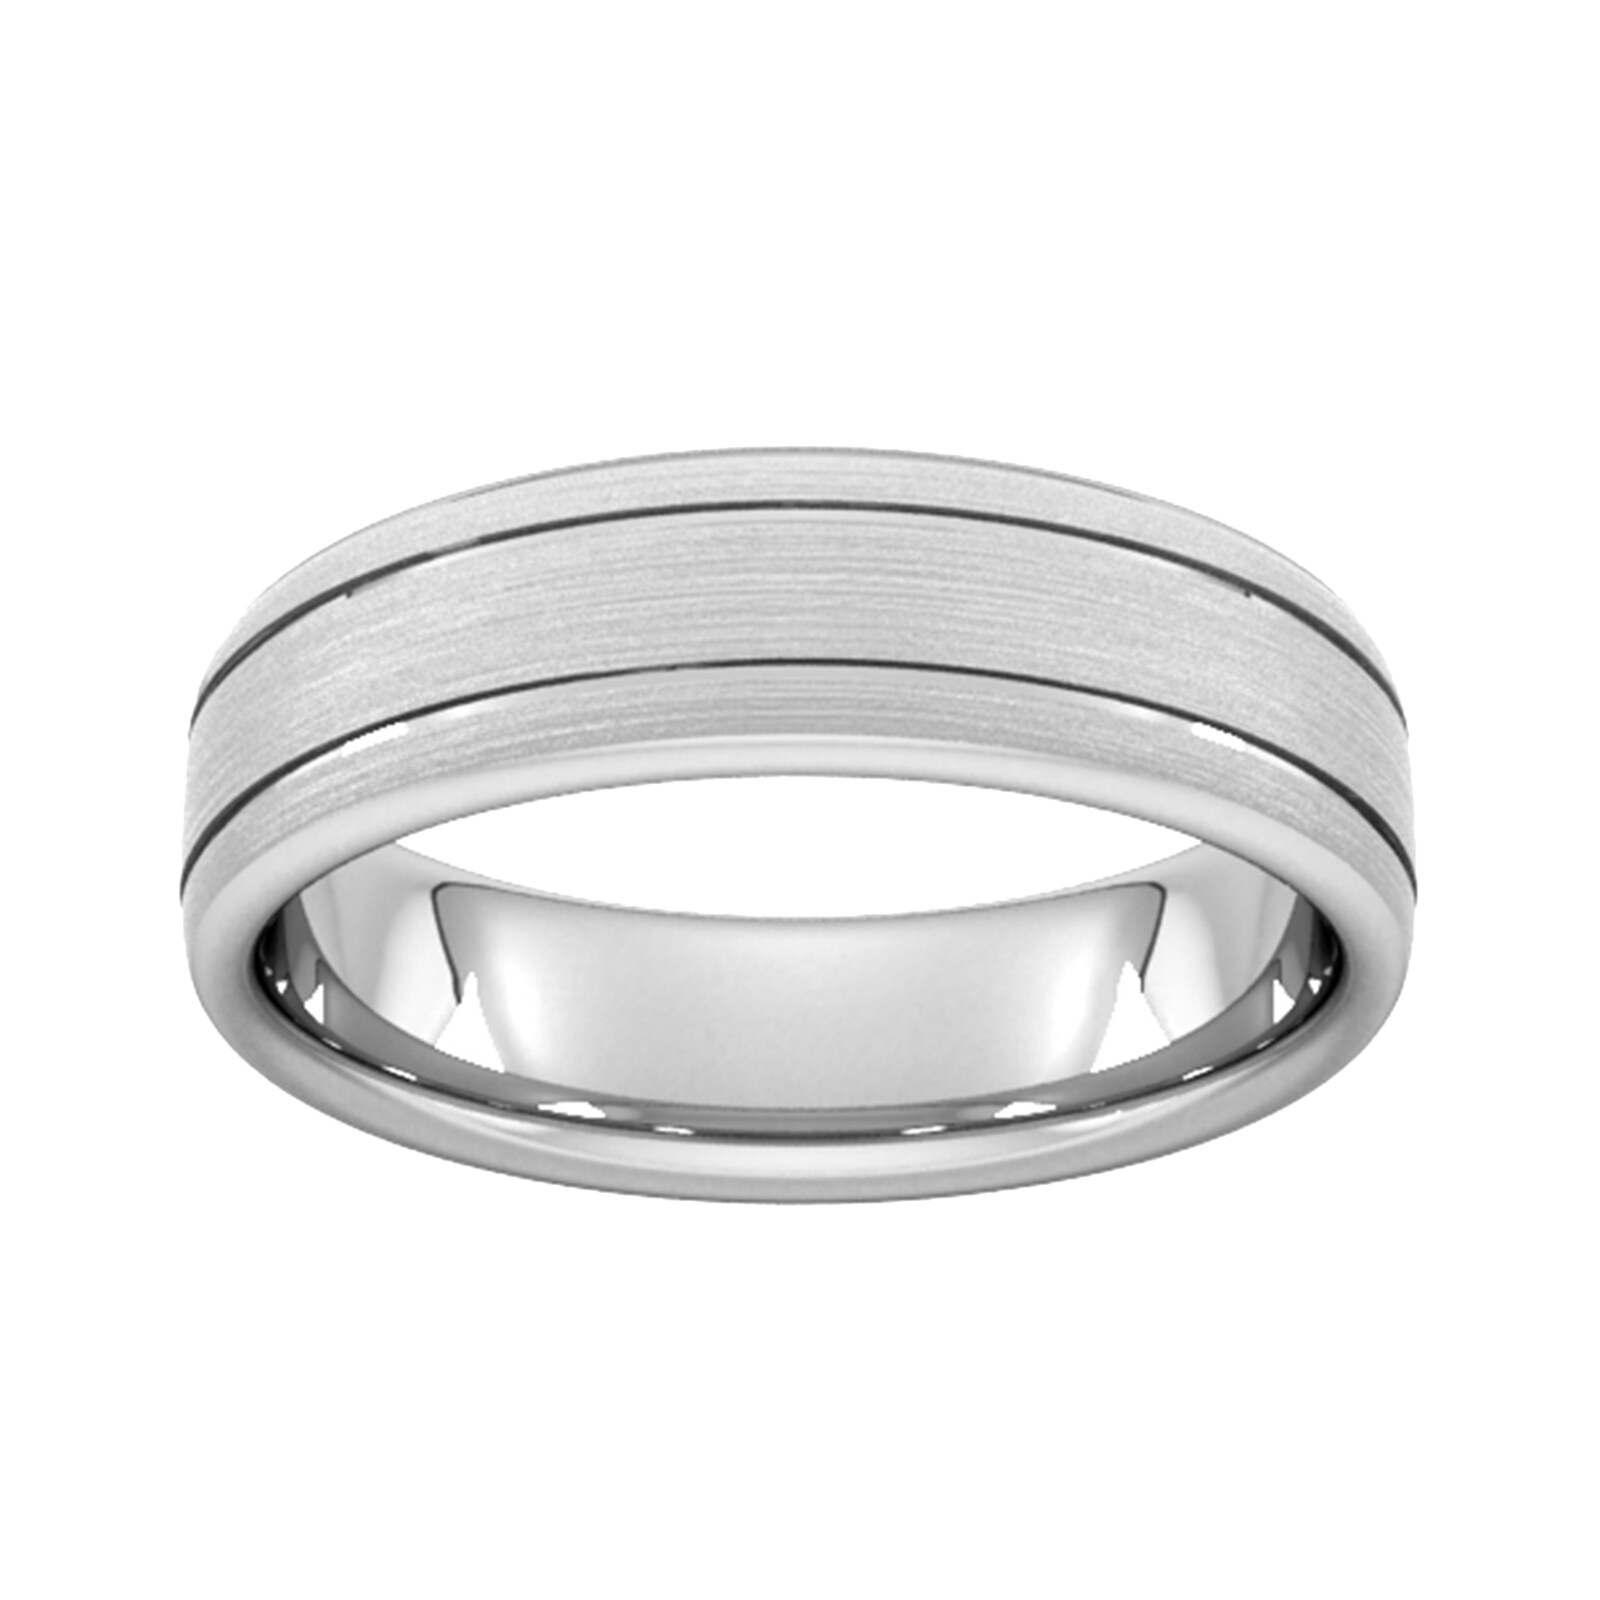 6mm Traditional Court Standard Matt Finish With Double Grooves Wedding Ring In 9 Carat White Gold - Ring Size L